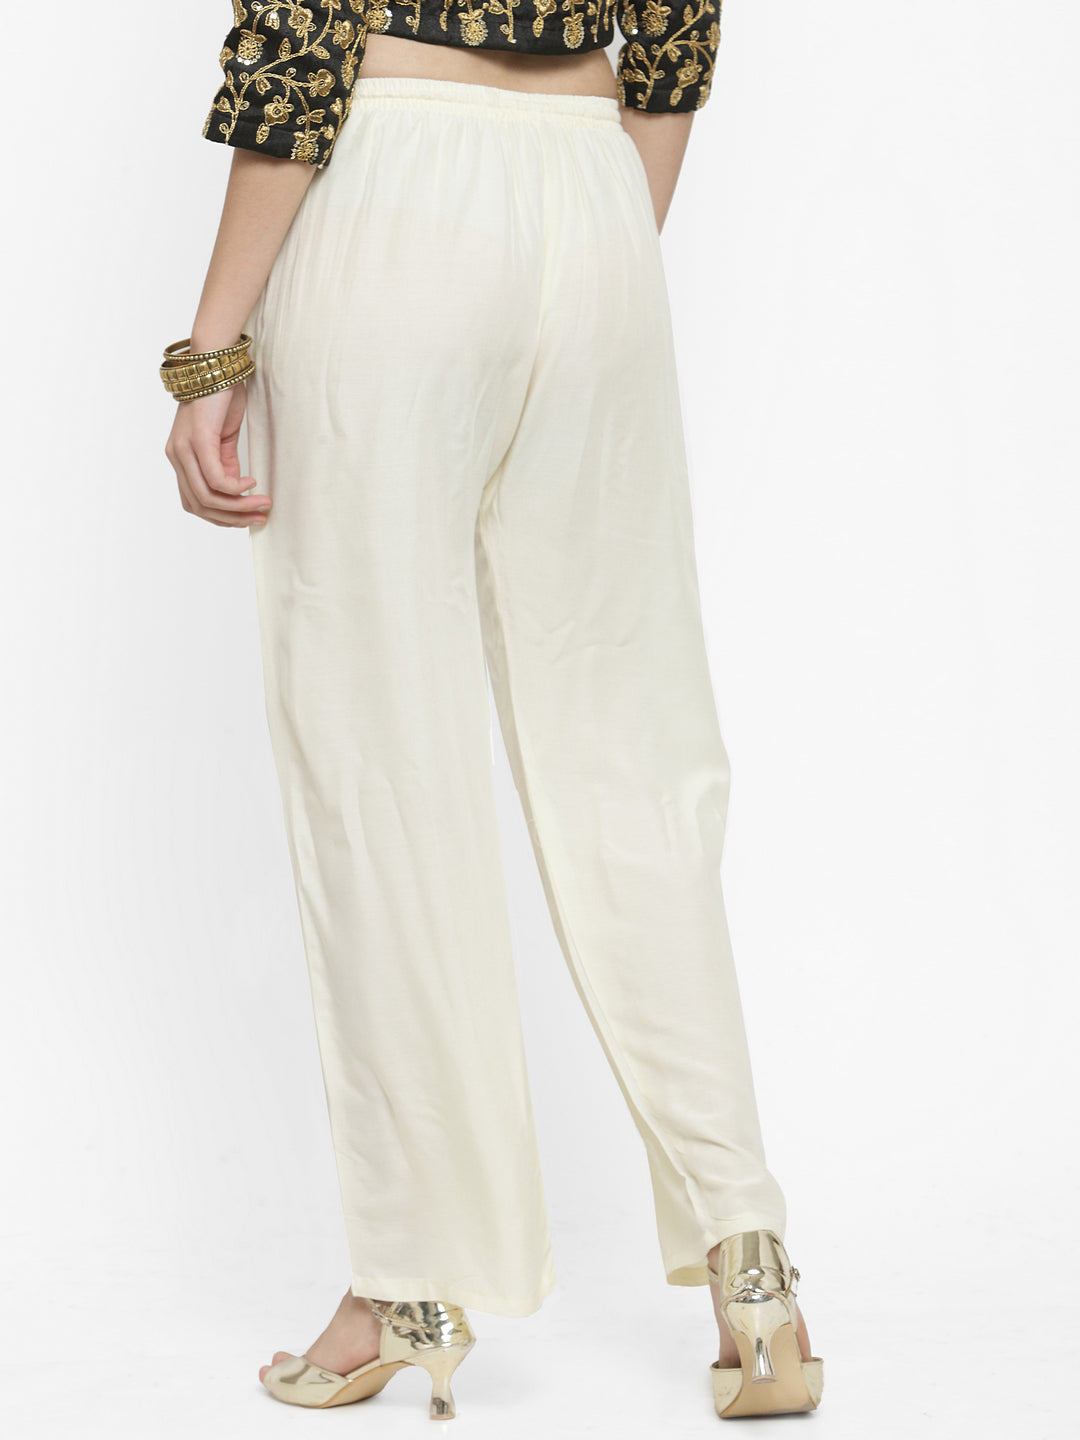 Clora Off-White Solid Rayon Palazzo